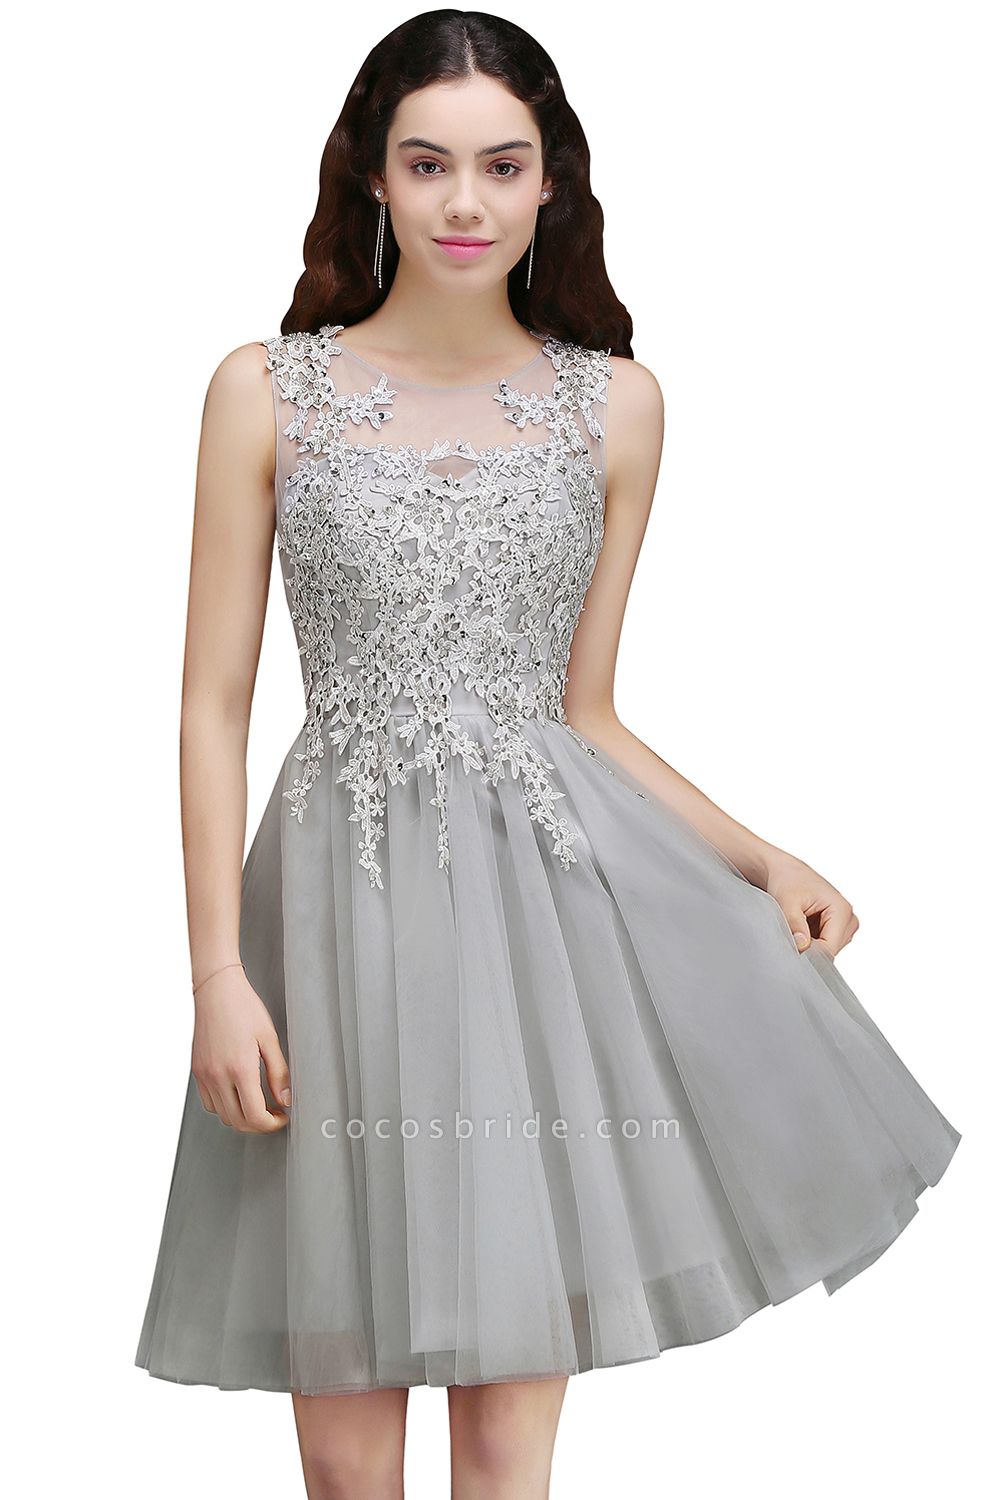 ANNA | A-line Short Modern Homecoming Dress With Lace Appliques